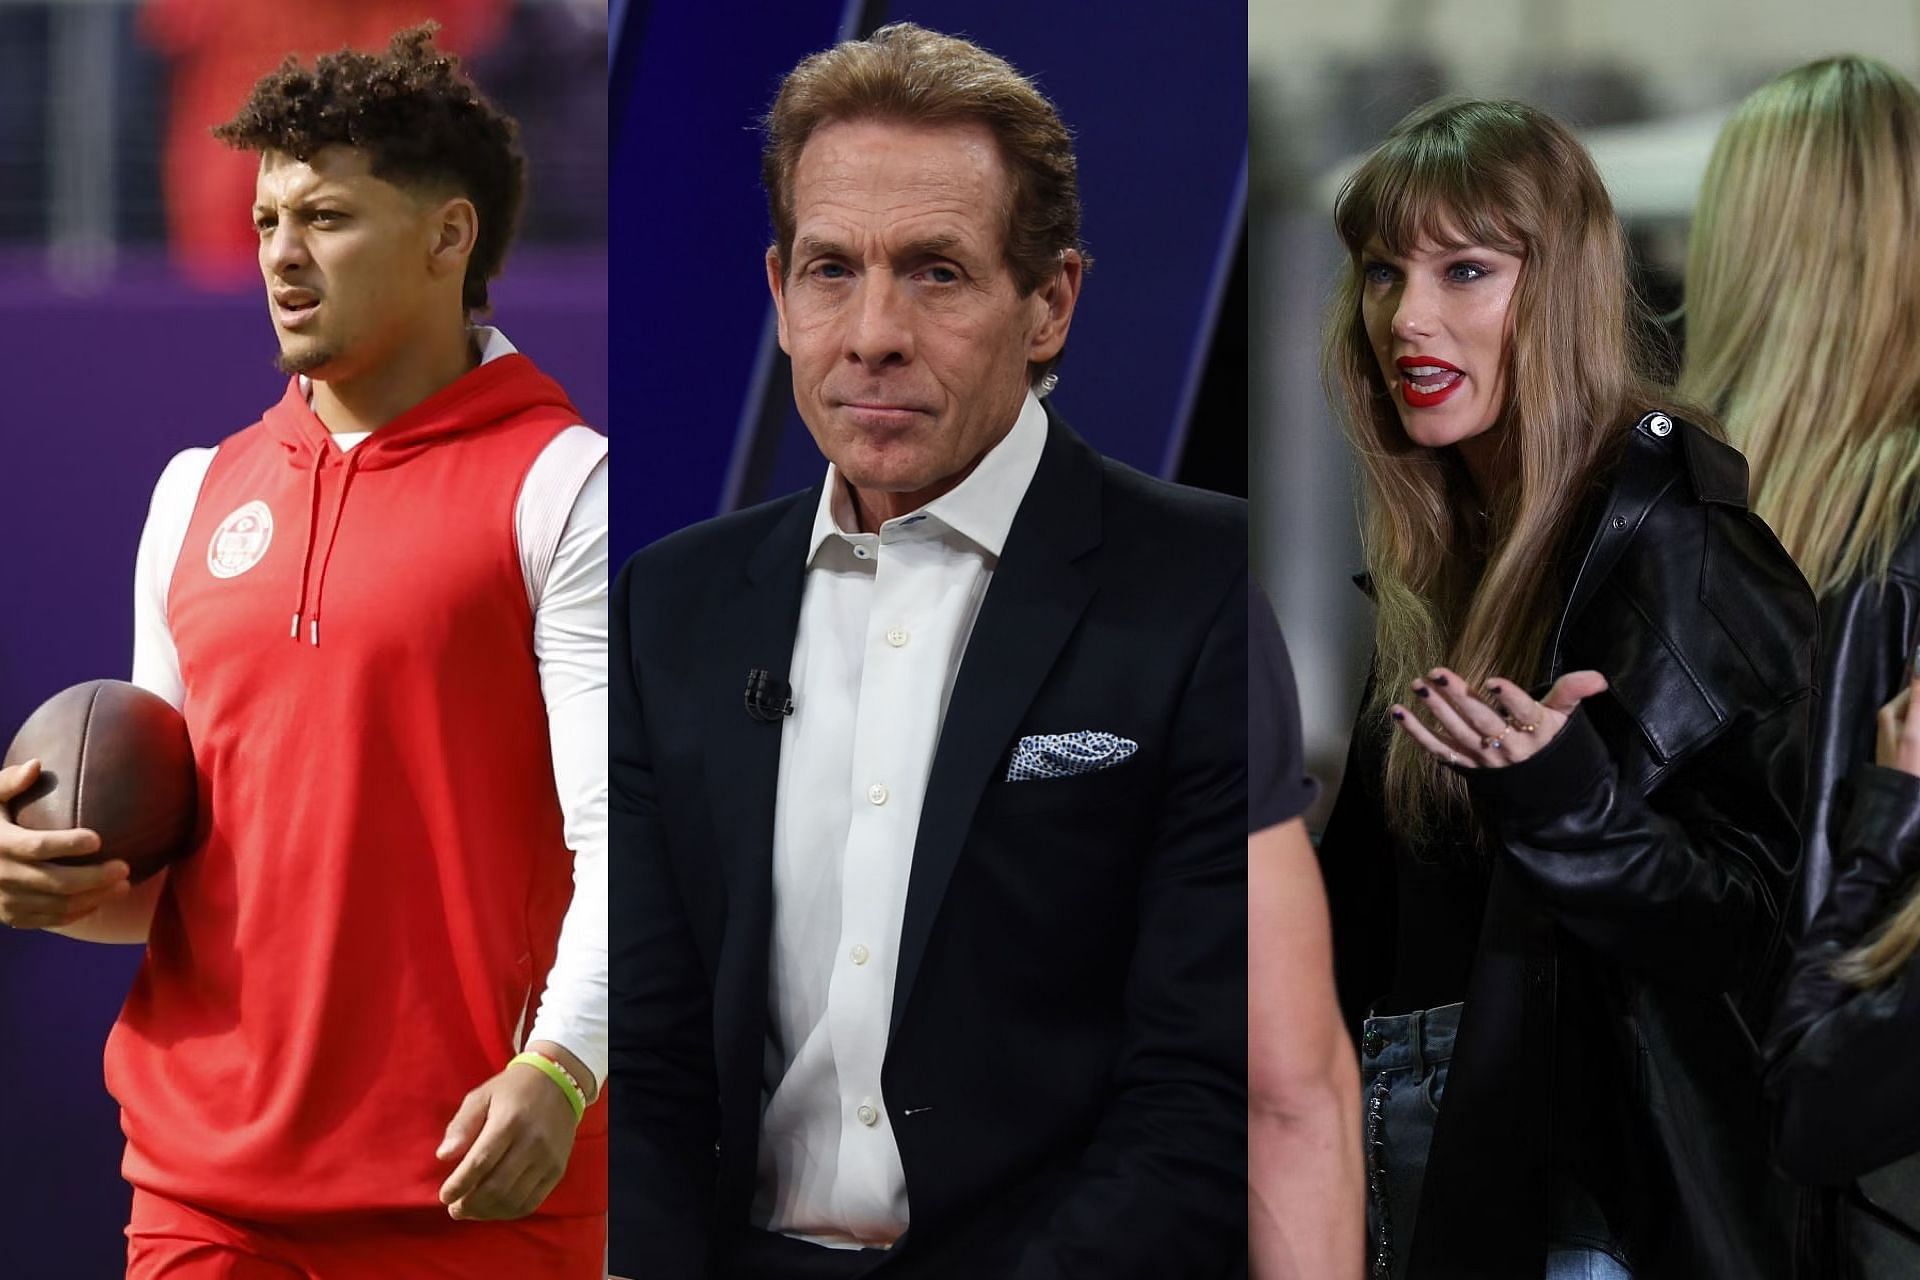 Skip Bayless takes shot at Patrick Mahomes&rsquo; Chiefs for questionable officiating against Vikings in Week 5 - &ldquo;Refs just saved the Taylor Swifts&rdquo;